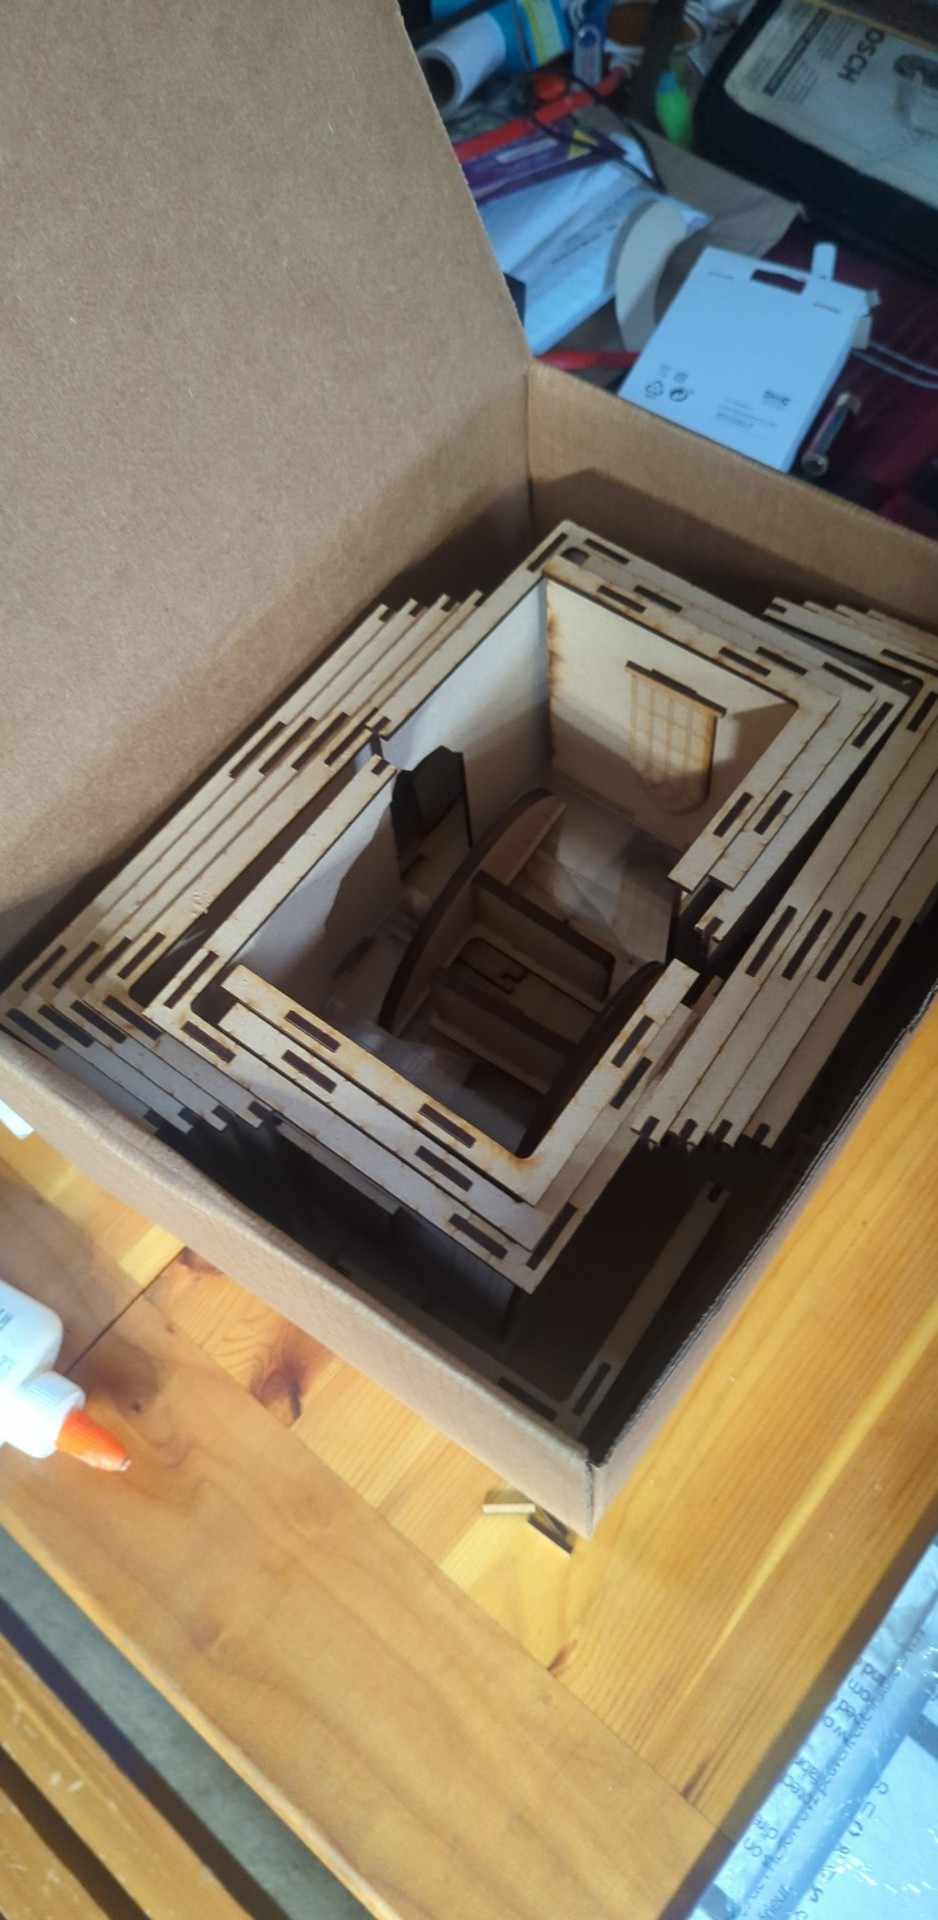 How to place assembled set back in the box